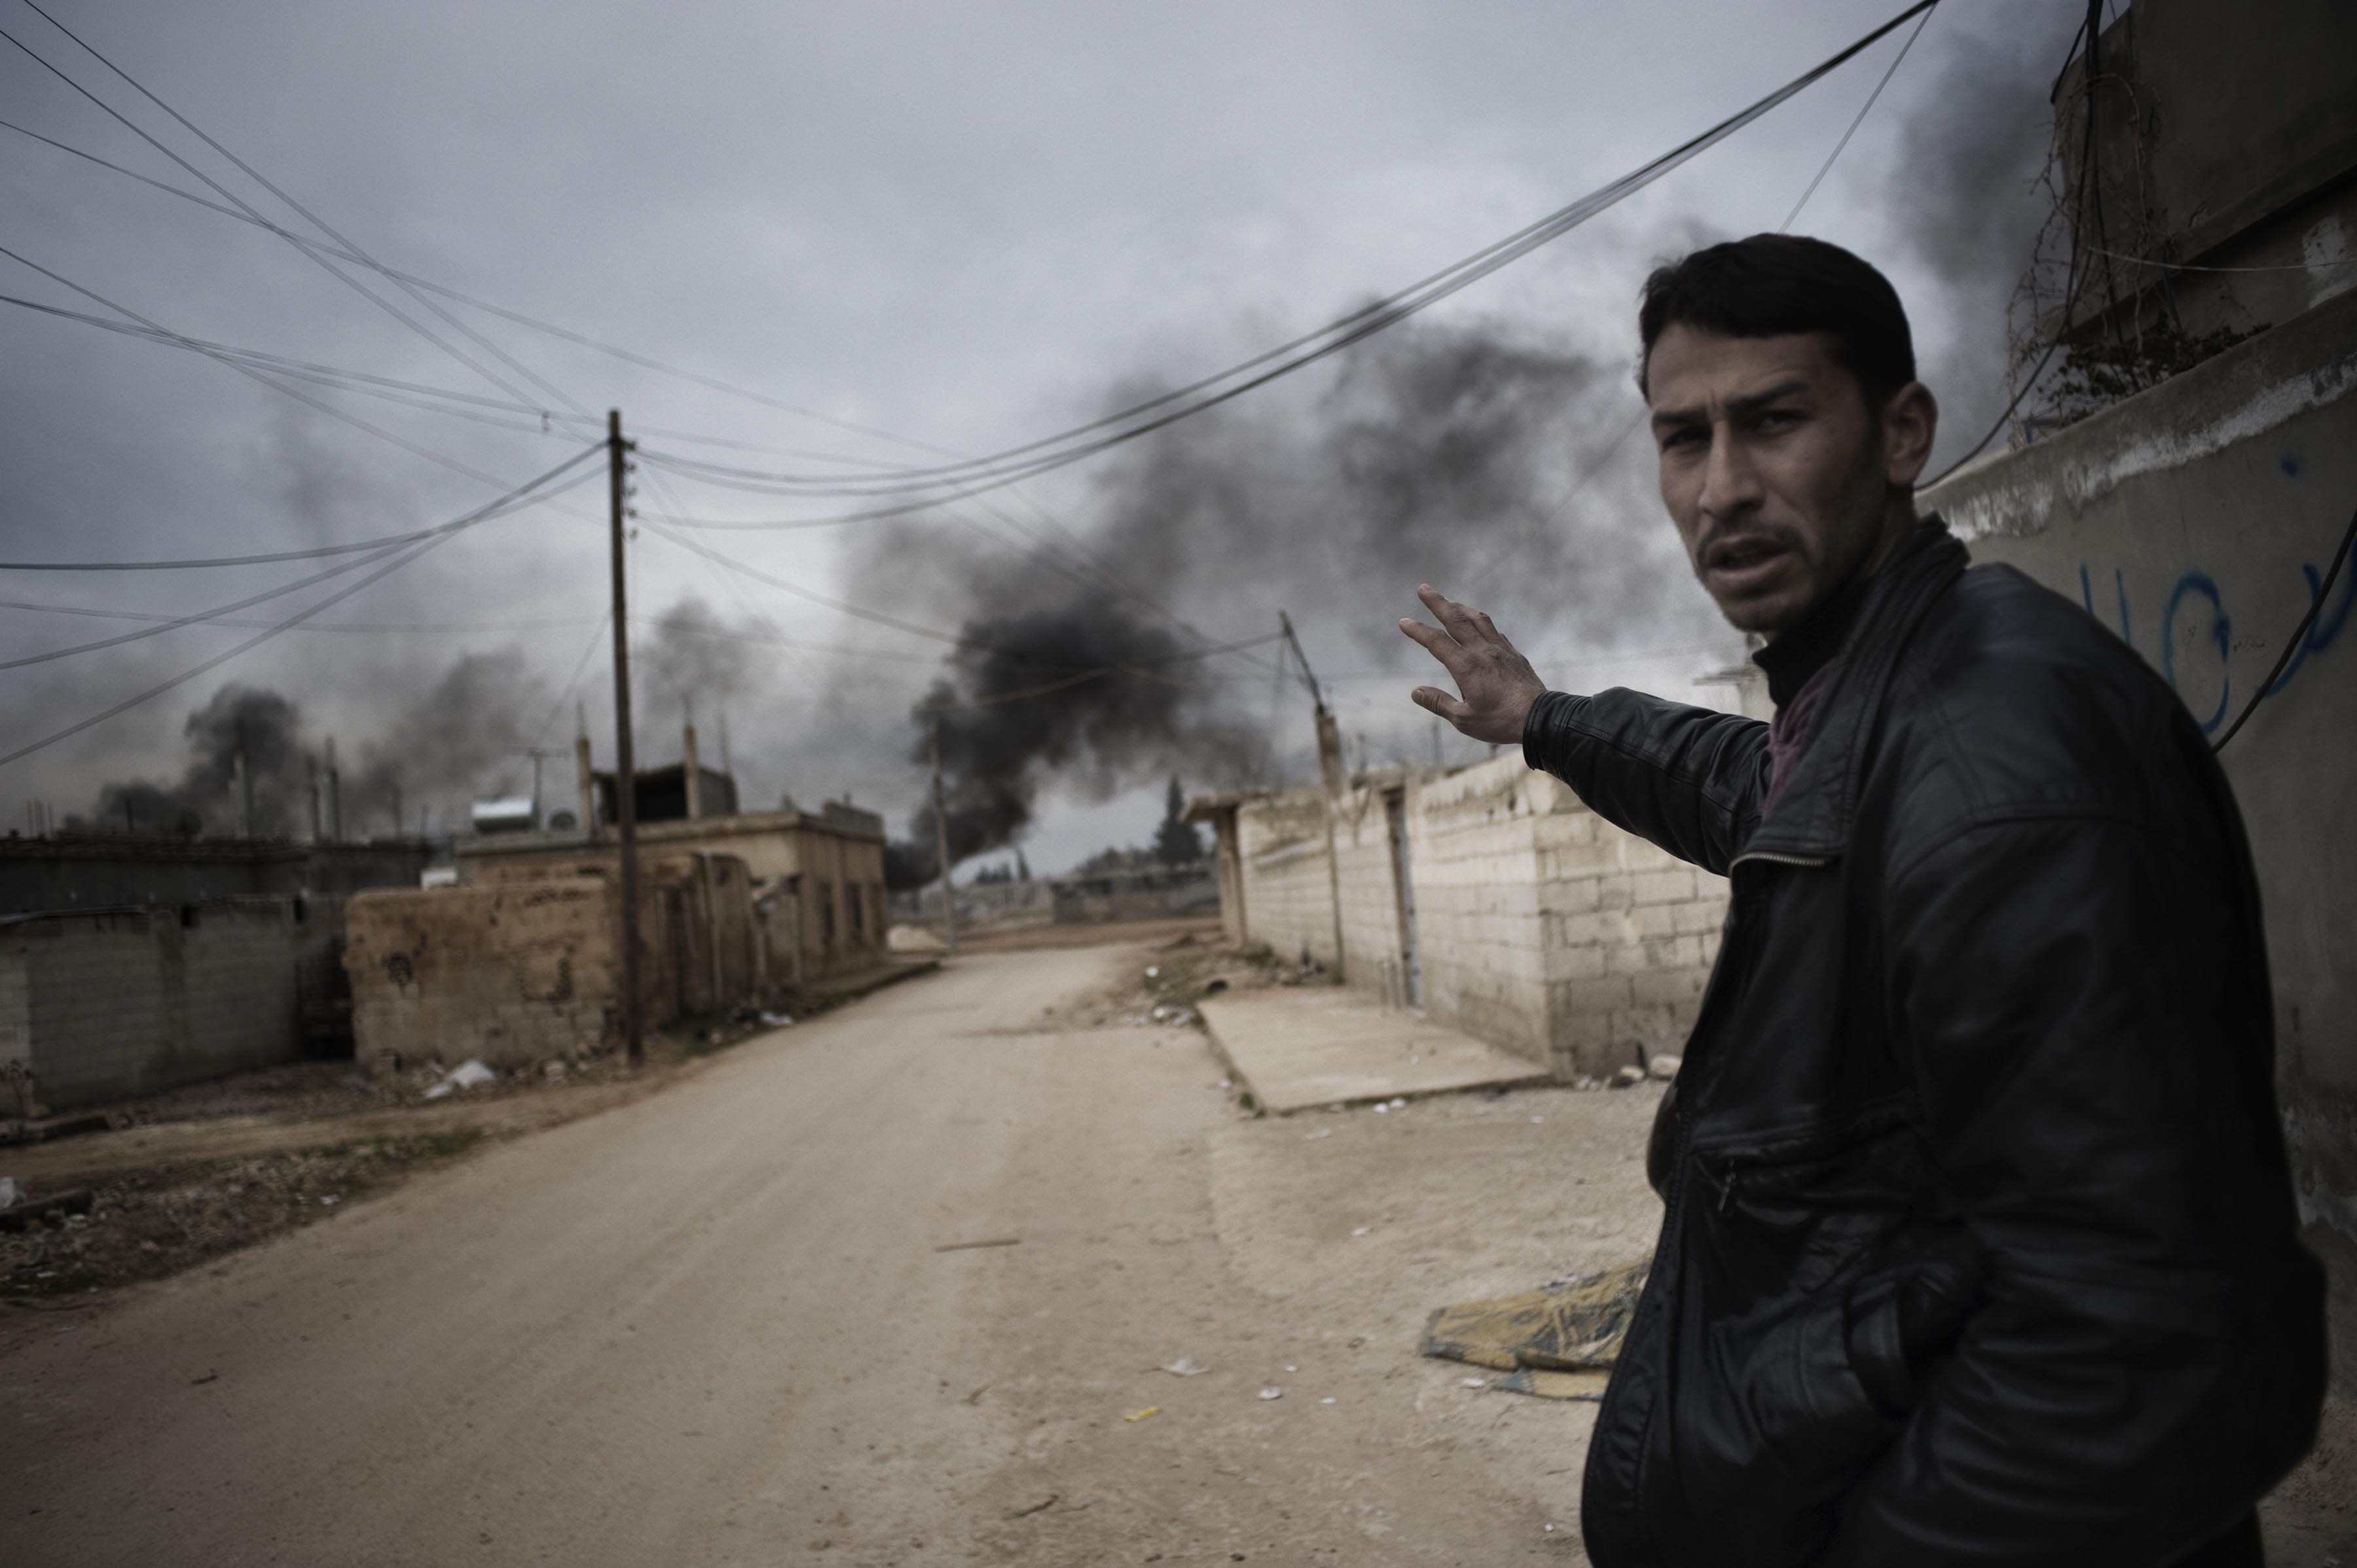 Feb. 23, 2012. A Syrian civilian shows the smoke of burning tires in a street close to combats between Free Syrian Army and Al Assad forces in al-Qsair.